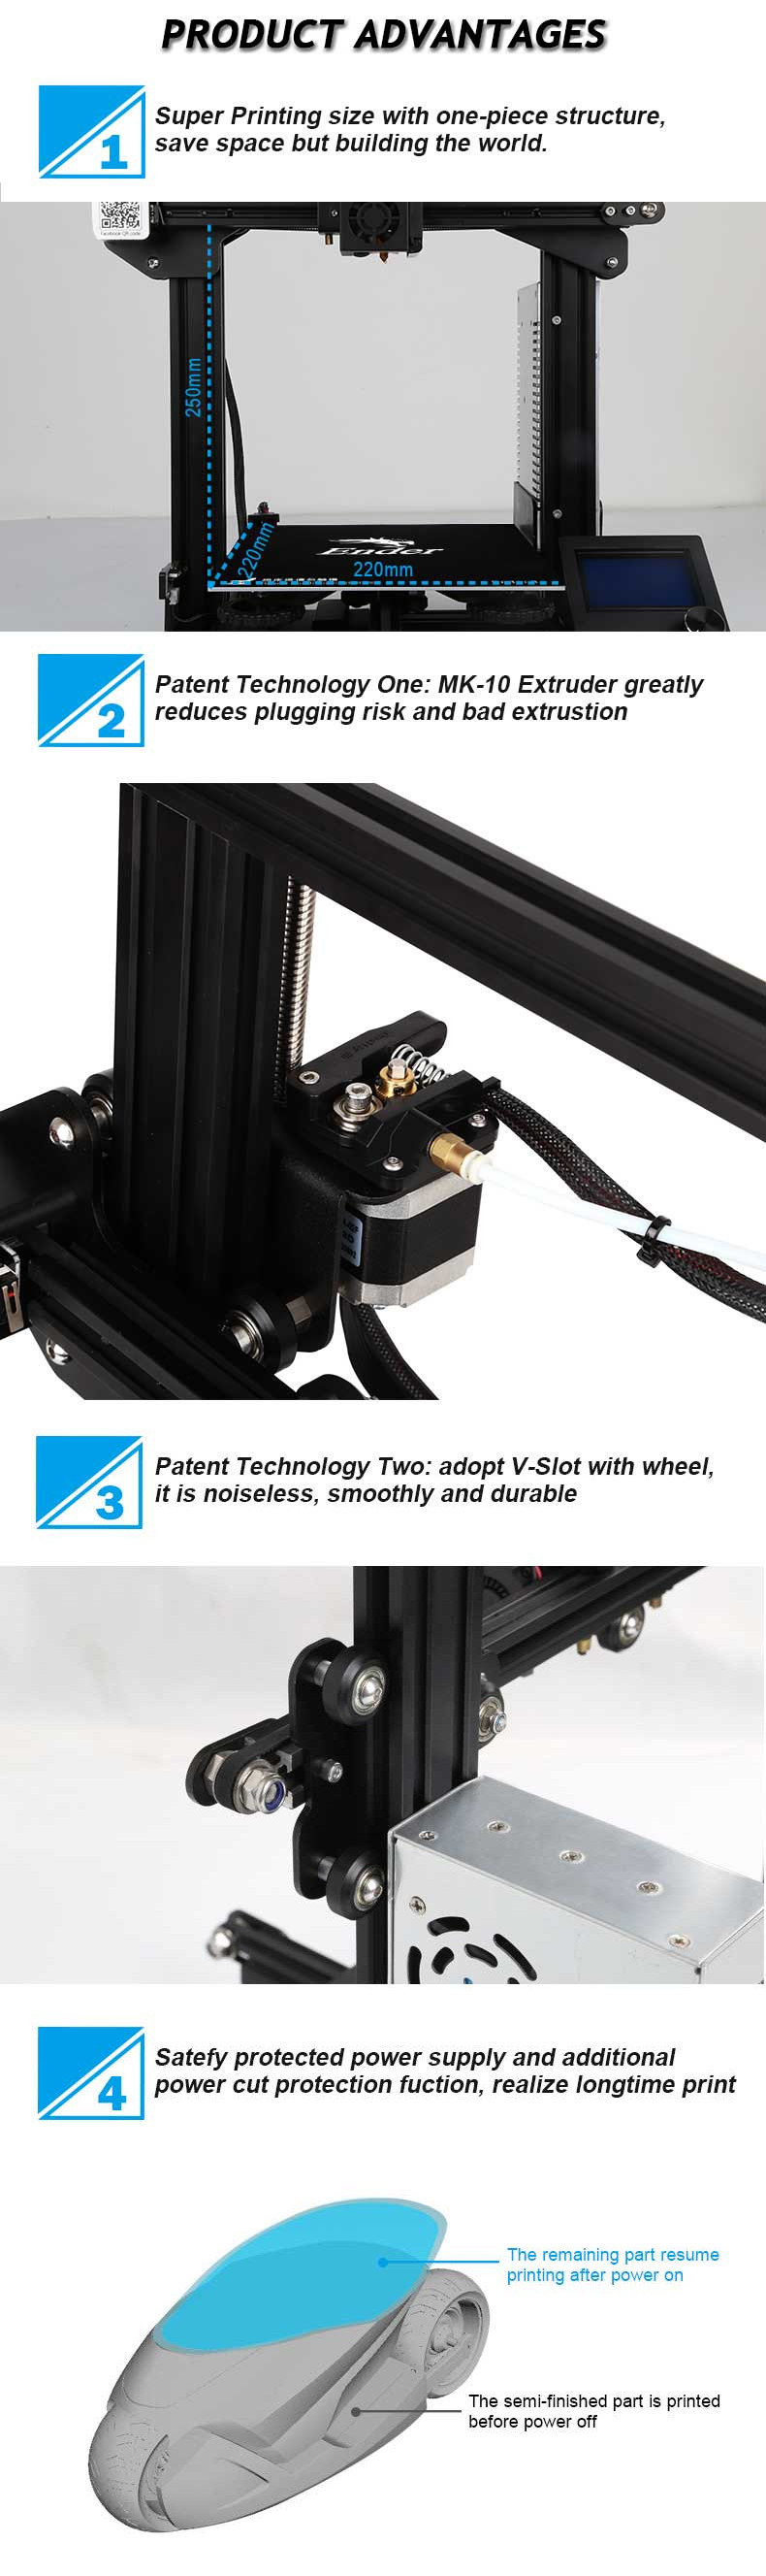 Creality 3D® Ender-3 V-slot Prusa I3 DIY 3D Printer Kit 220x220x250mm Printing Size With Power Resume Function/MK10 Extruder 1.75mm 0.4mm Nozzle 33